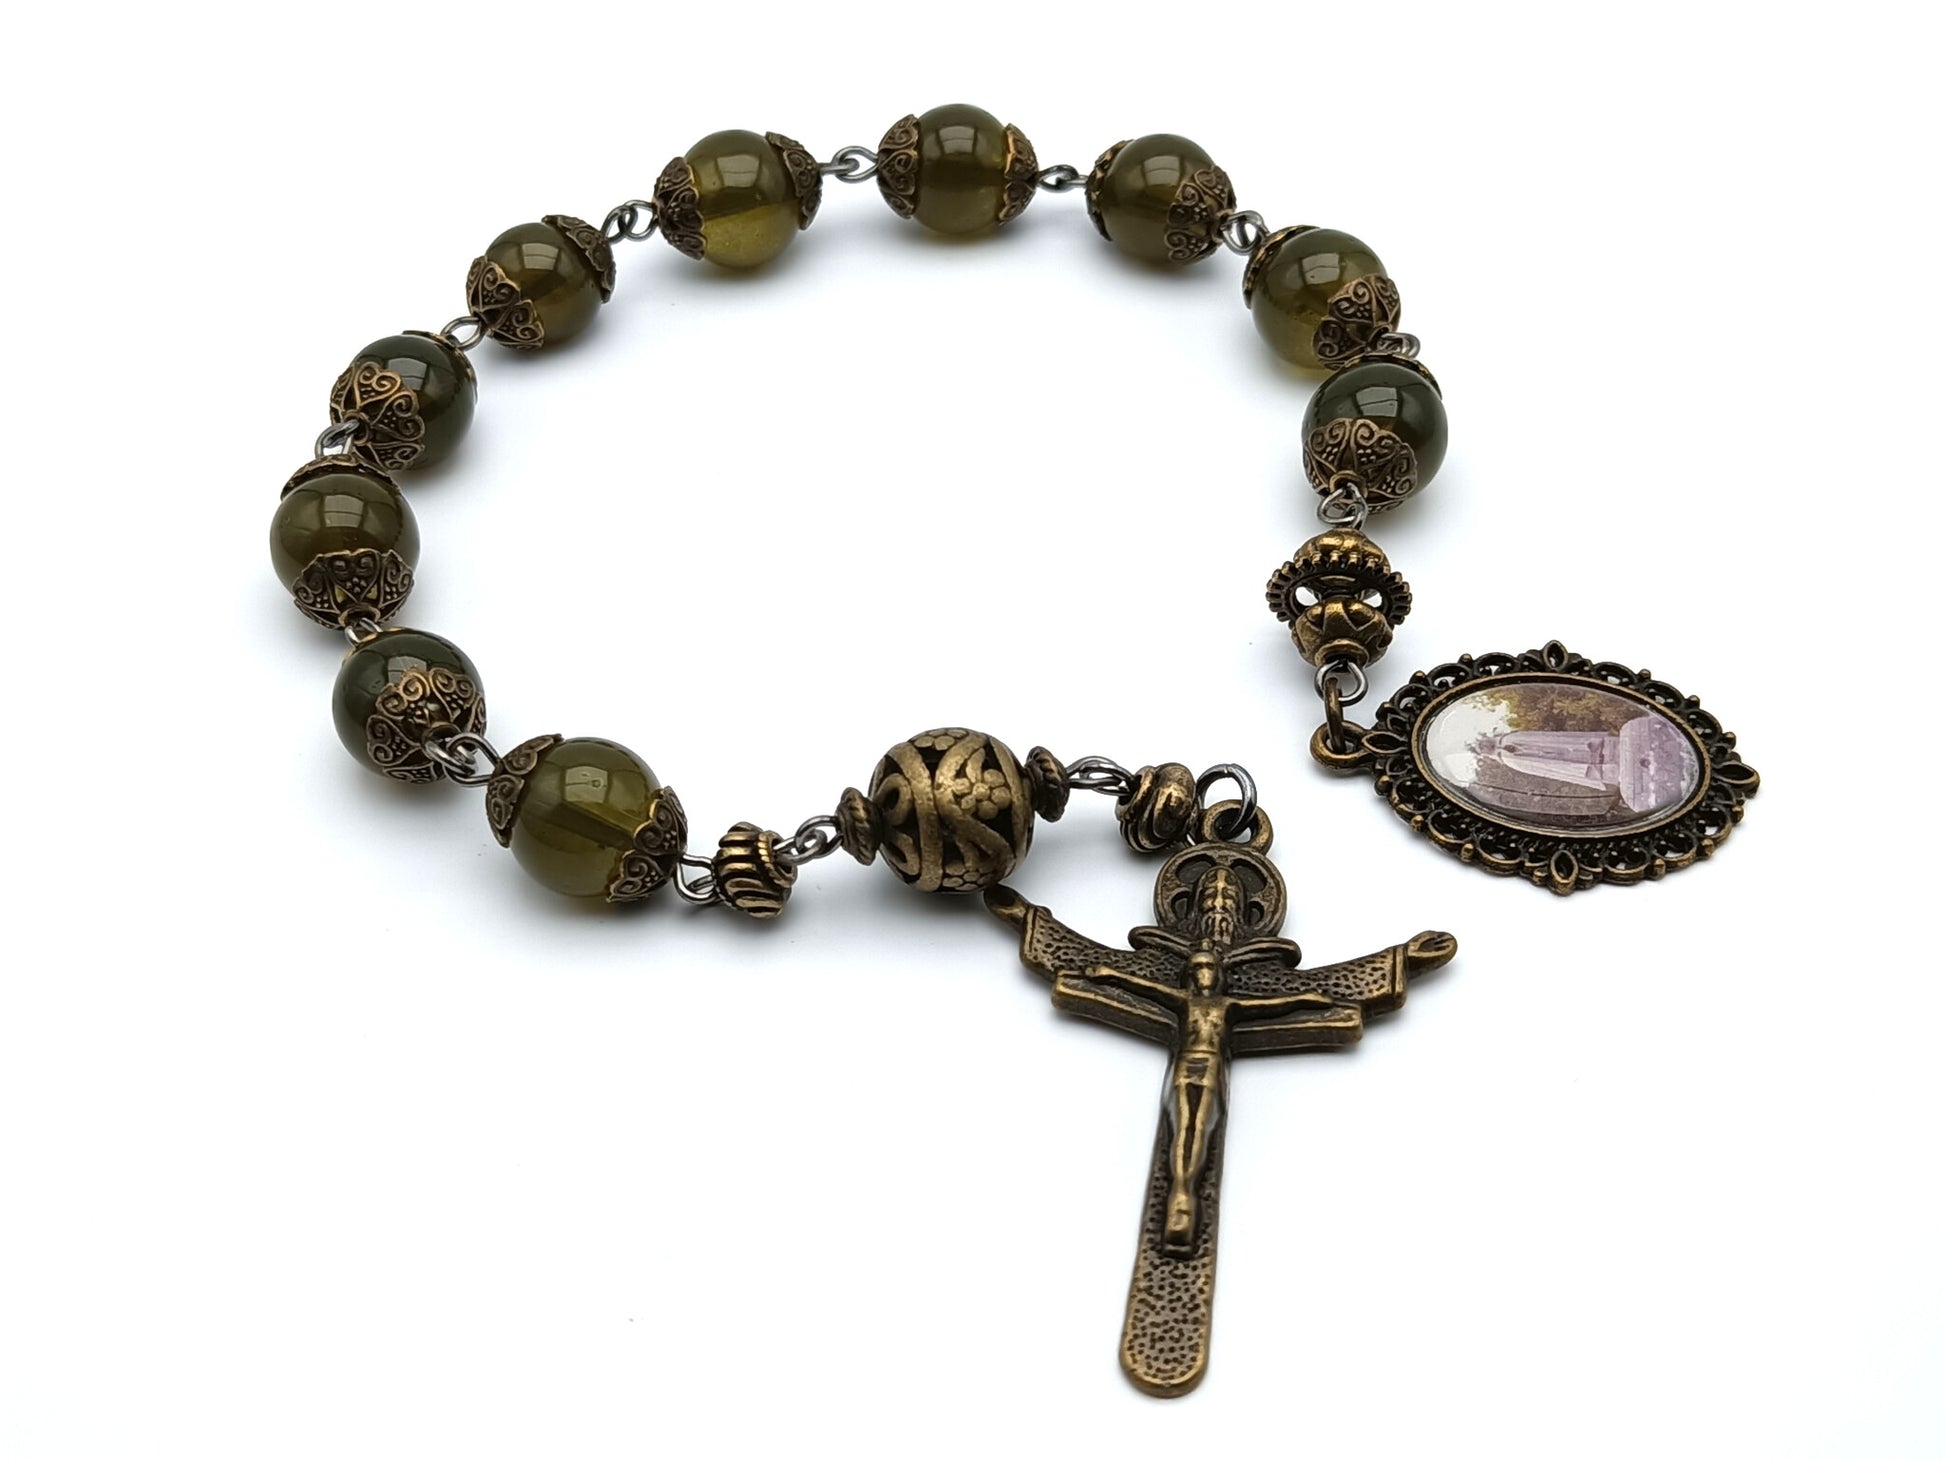 Saint Gobnait unique rosary beads single decade or tenner rosary with green glass beads bronze bead caps, pater bead, Trinity crucifix and picture medal.